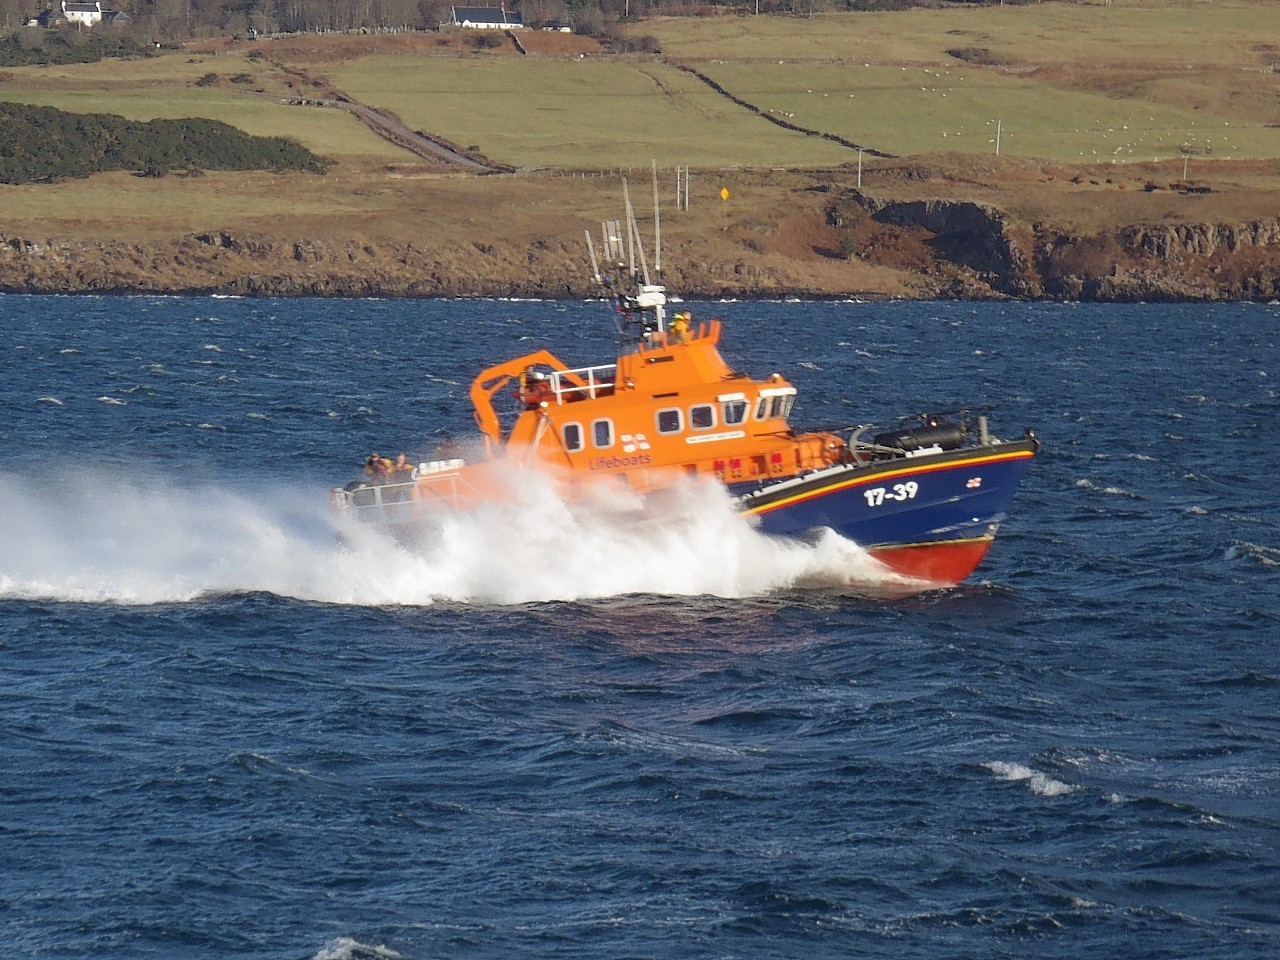 Macduff Lifeboat was called out last night